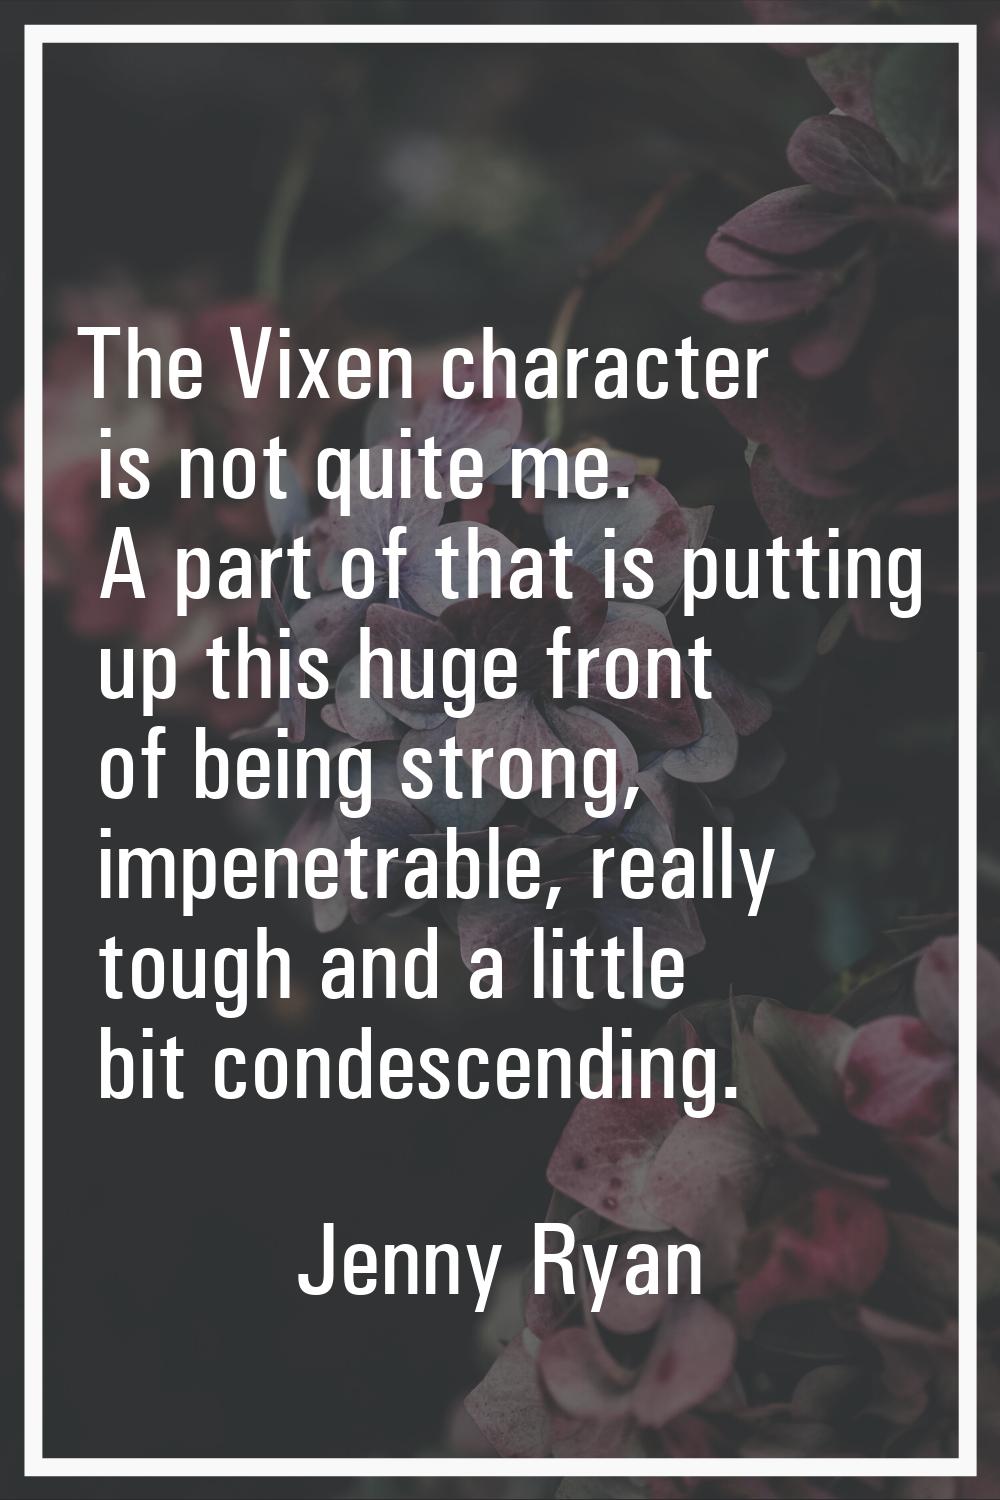 The Vixen character is not quite me. A part of that is putting up this huge front of being strong, 